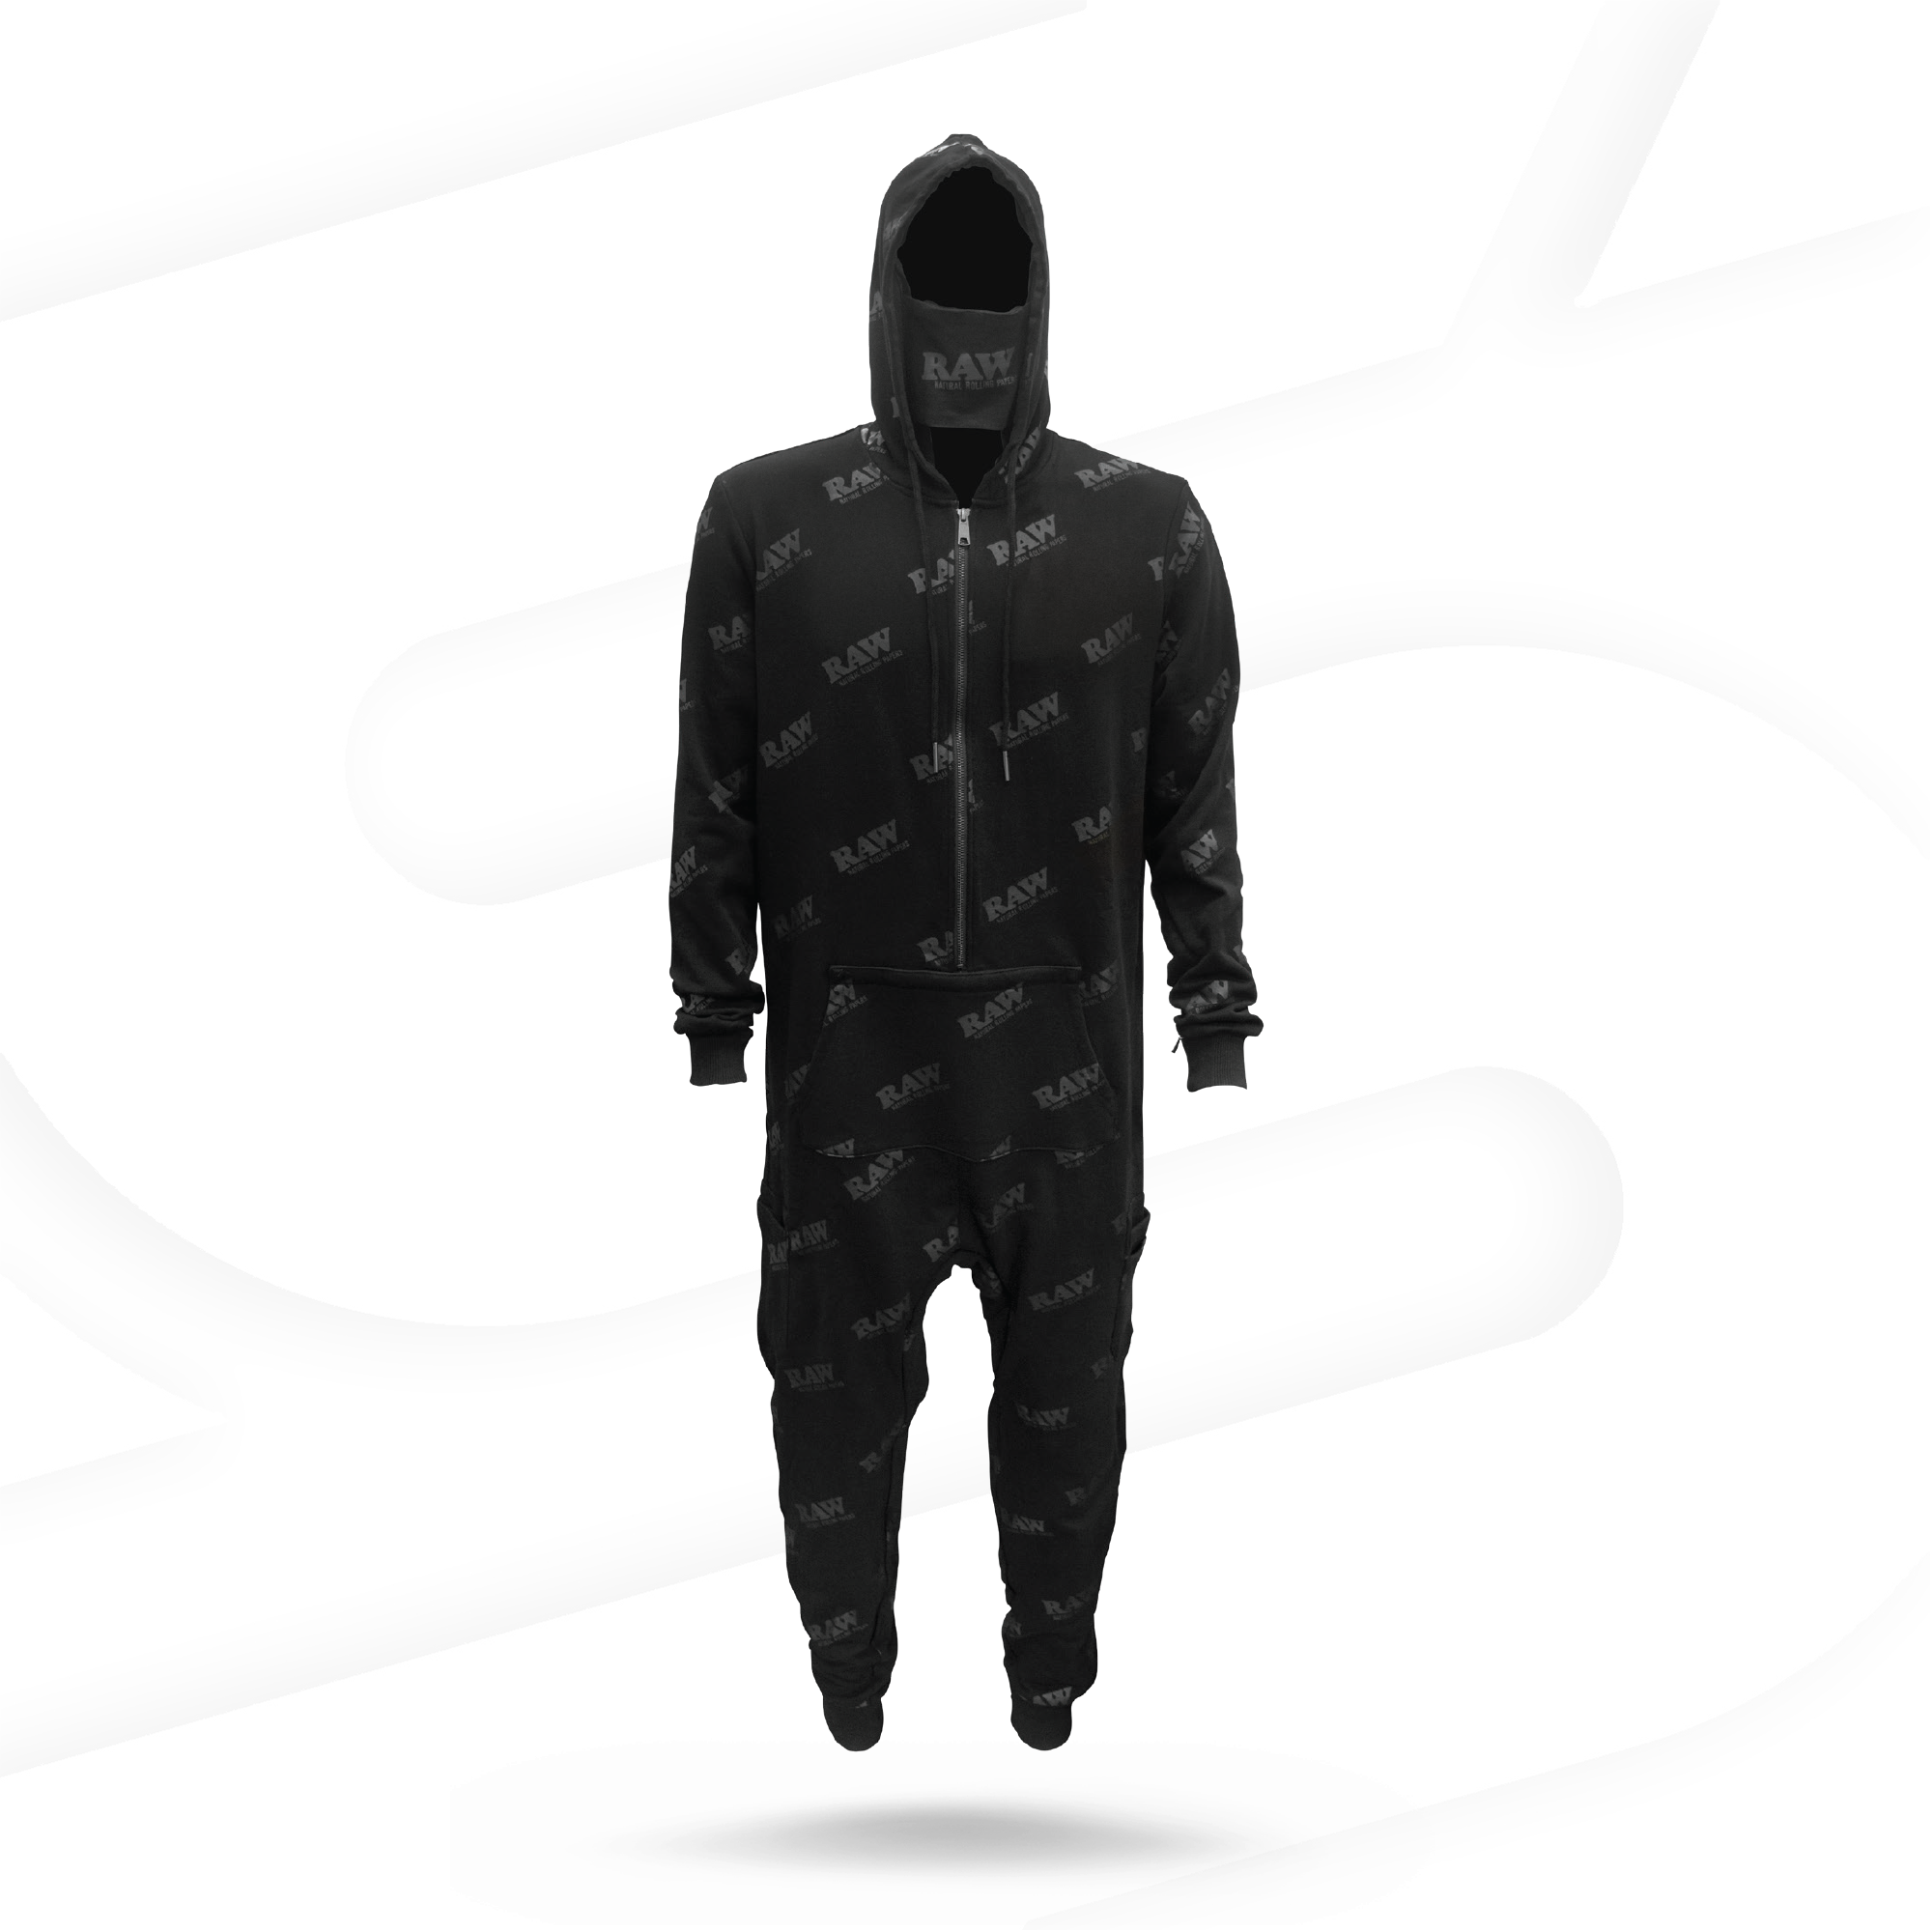 RAW Spacesuit | All Black Clothing Accessories esd-official